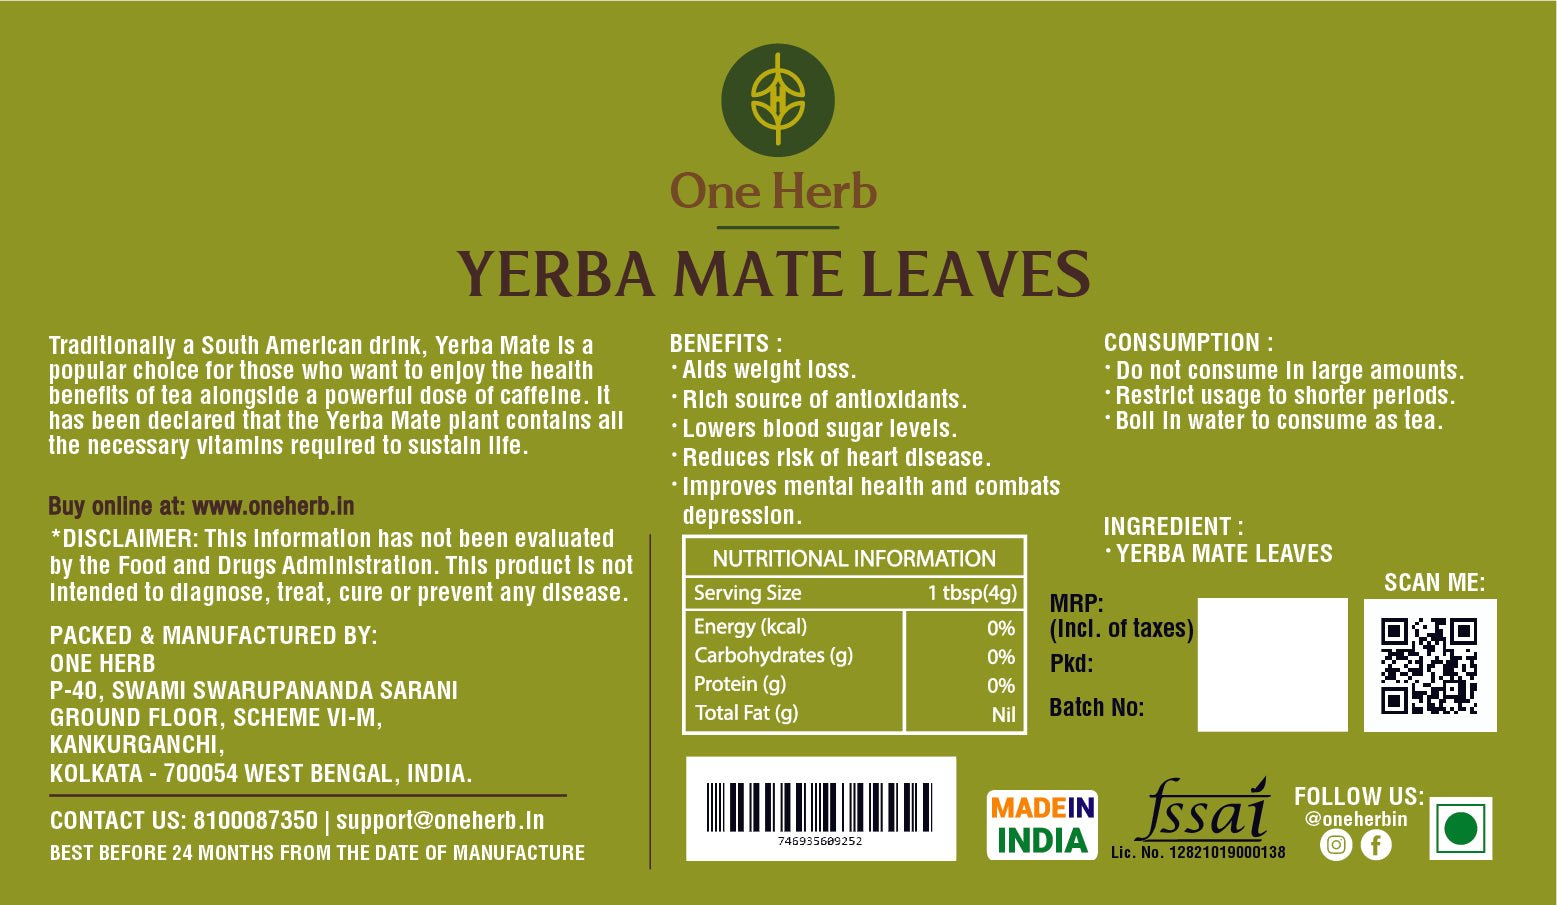 WHAT IS YERBA MATE ? WHAT IS SPECIAL OF THE PRODUCT ? HOW DO YOU COMPARE YERBA  MATE